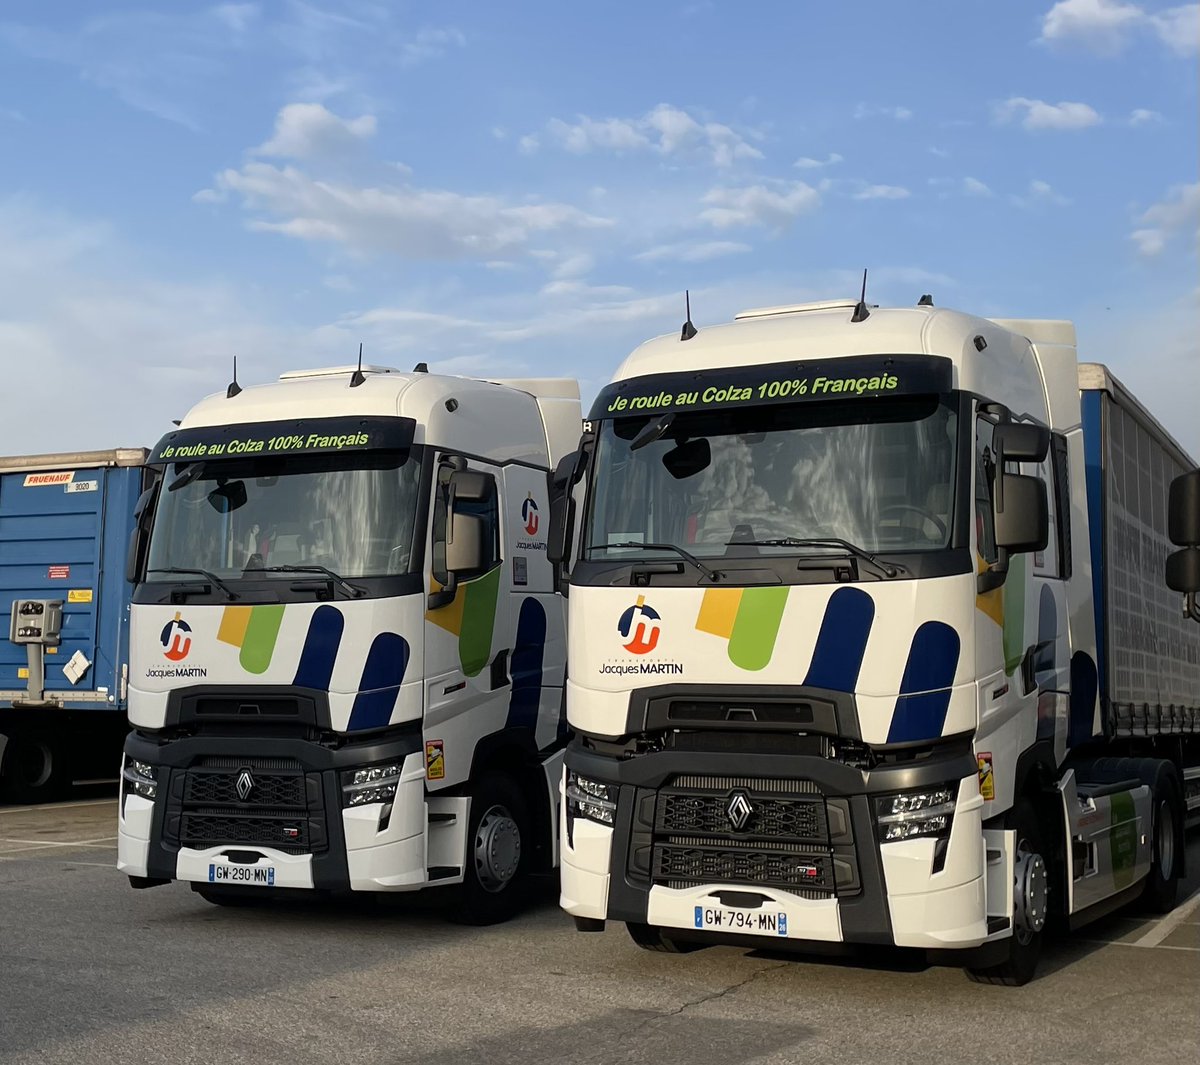 Another brand new pair of trucks that run on rapeseed oil. There is a lot of investment in clean energy in French transport, not least because some prestigious clients demand it. What’s it like in the UK 🇬🇧 @trucklifegb?